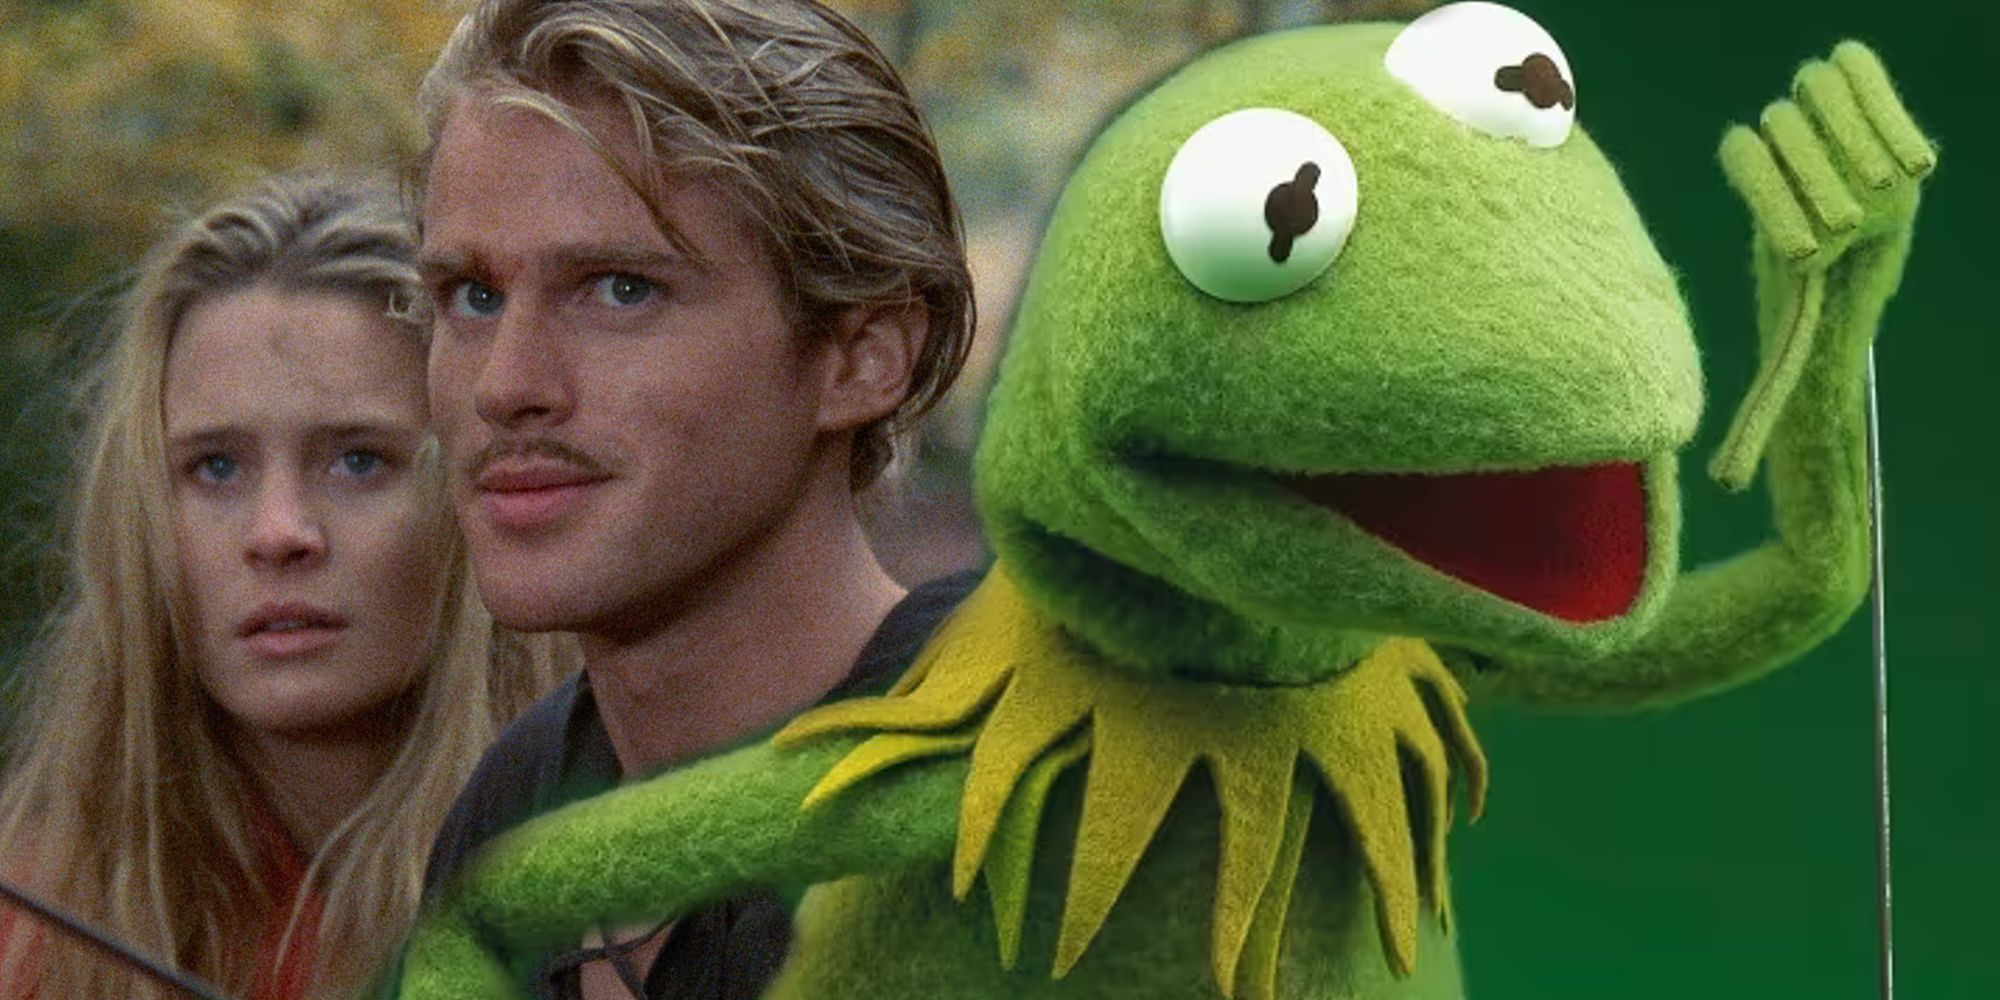 Kermit the Frog in front of Robin Wright as Buttercup and Cary Elwes as Westley in The Princess Bride 